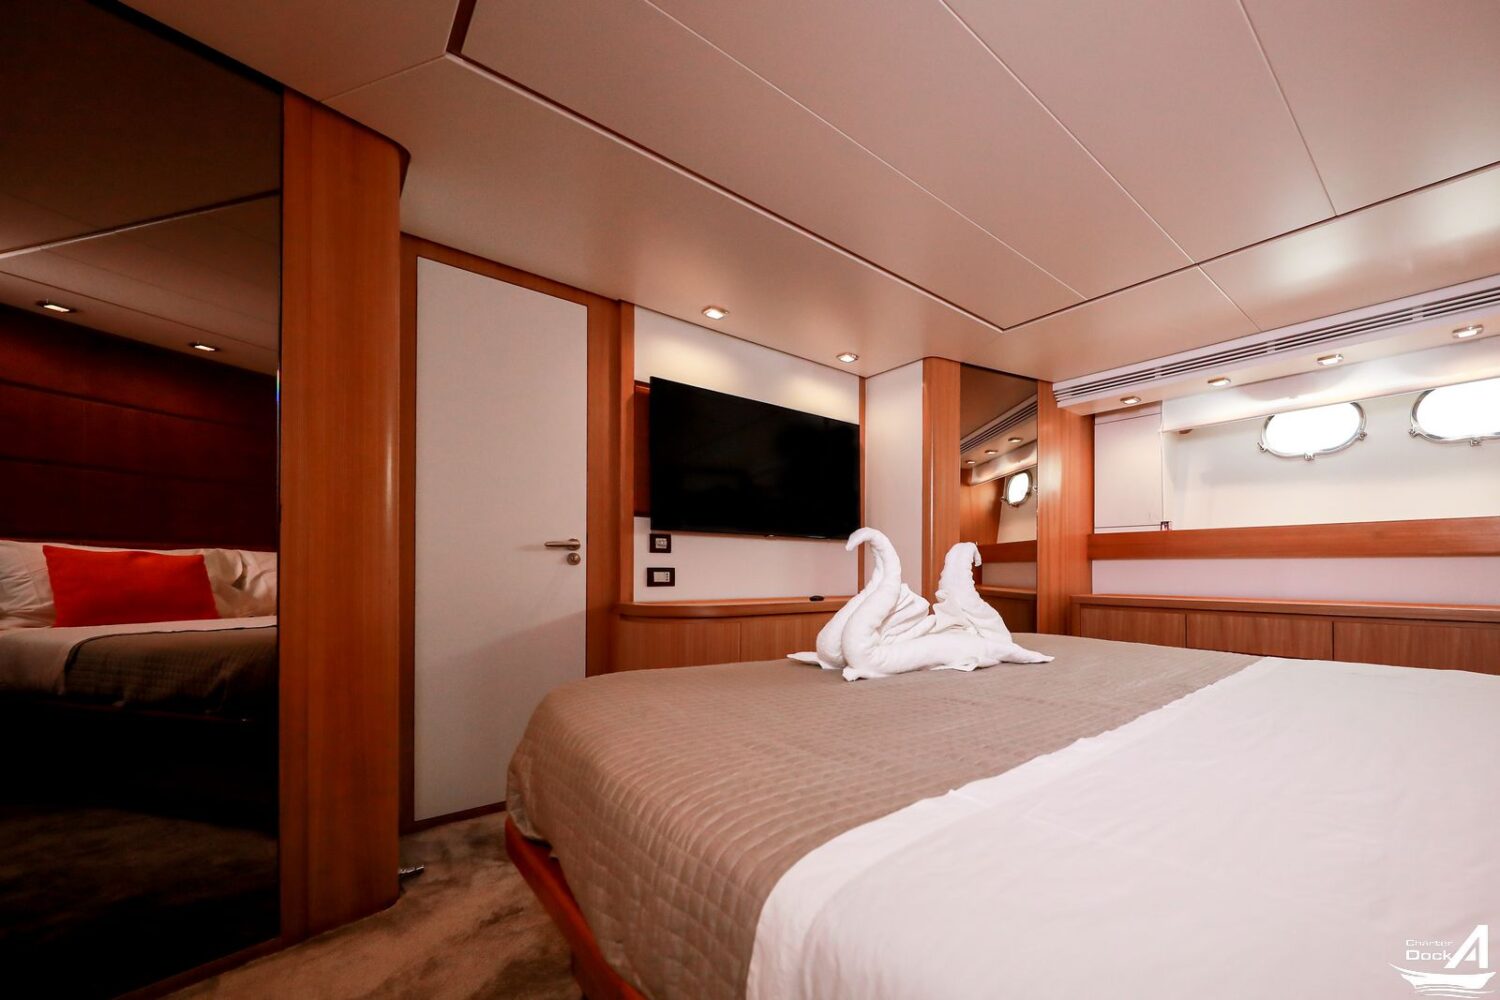 Yacht interior featuring opulent furnishings and large windows overlooking the sea